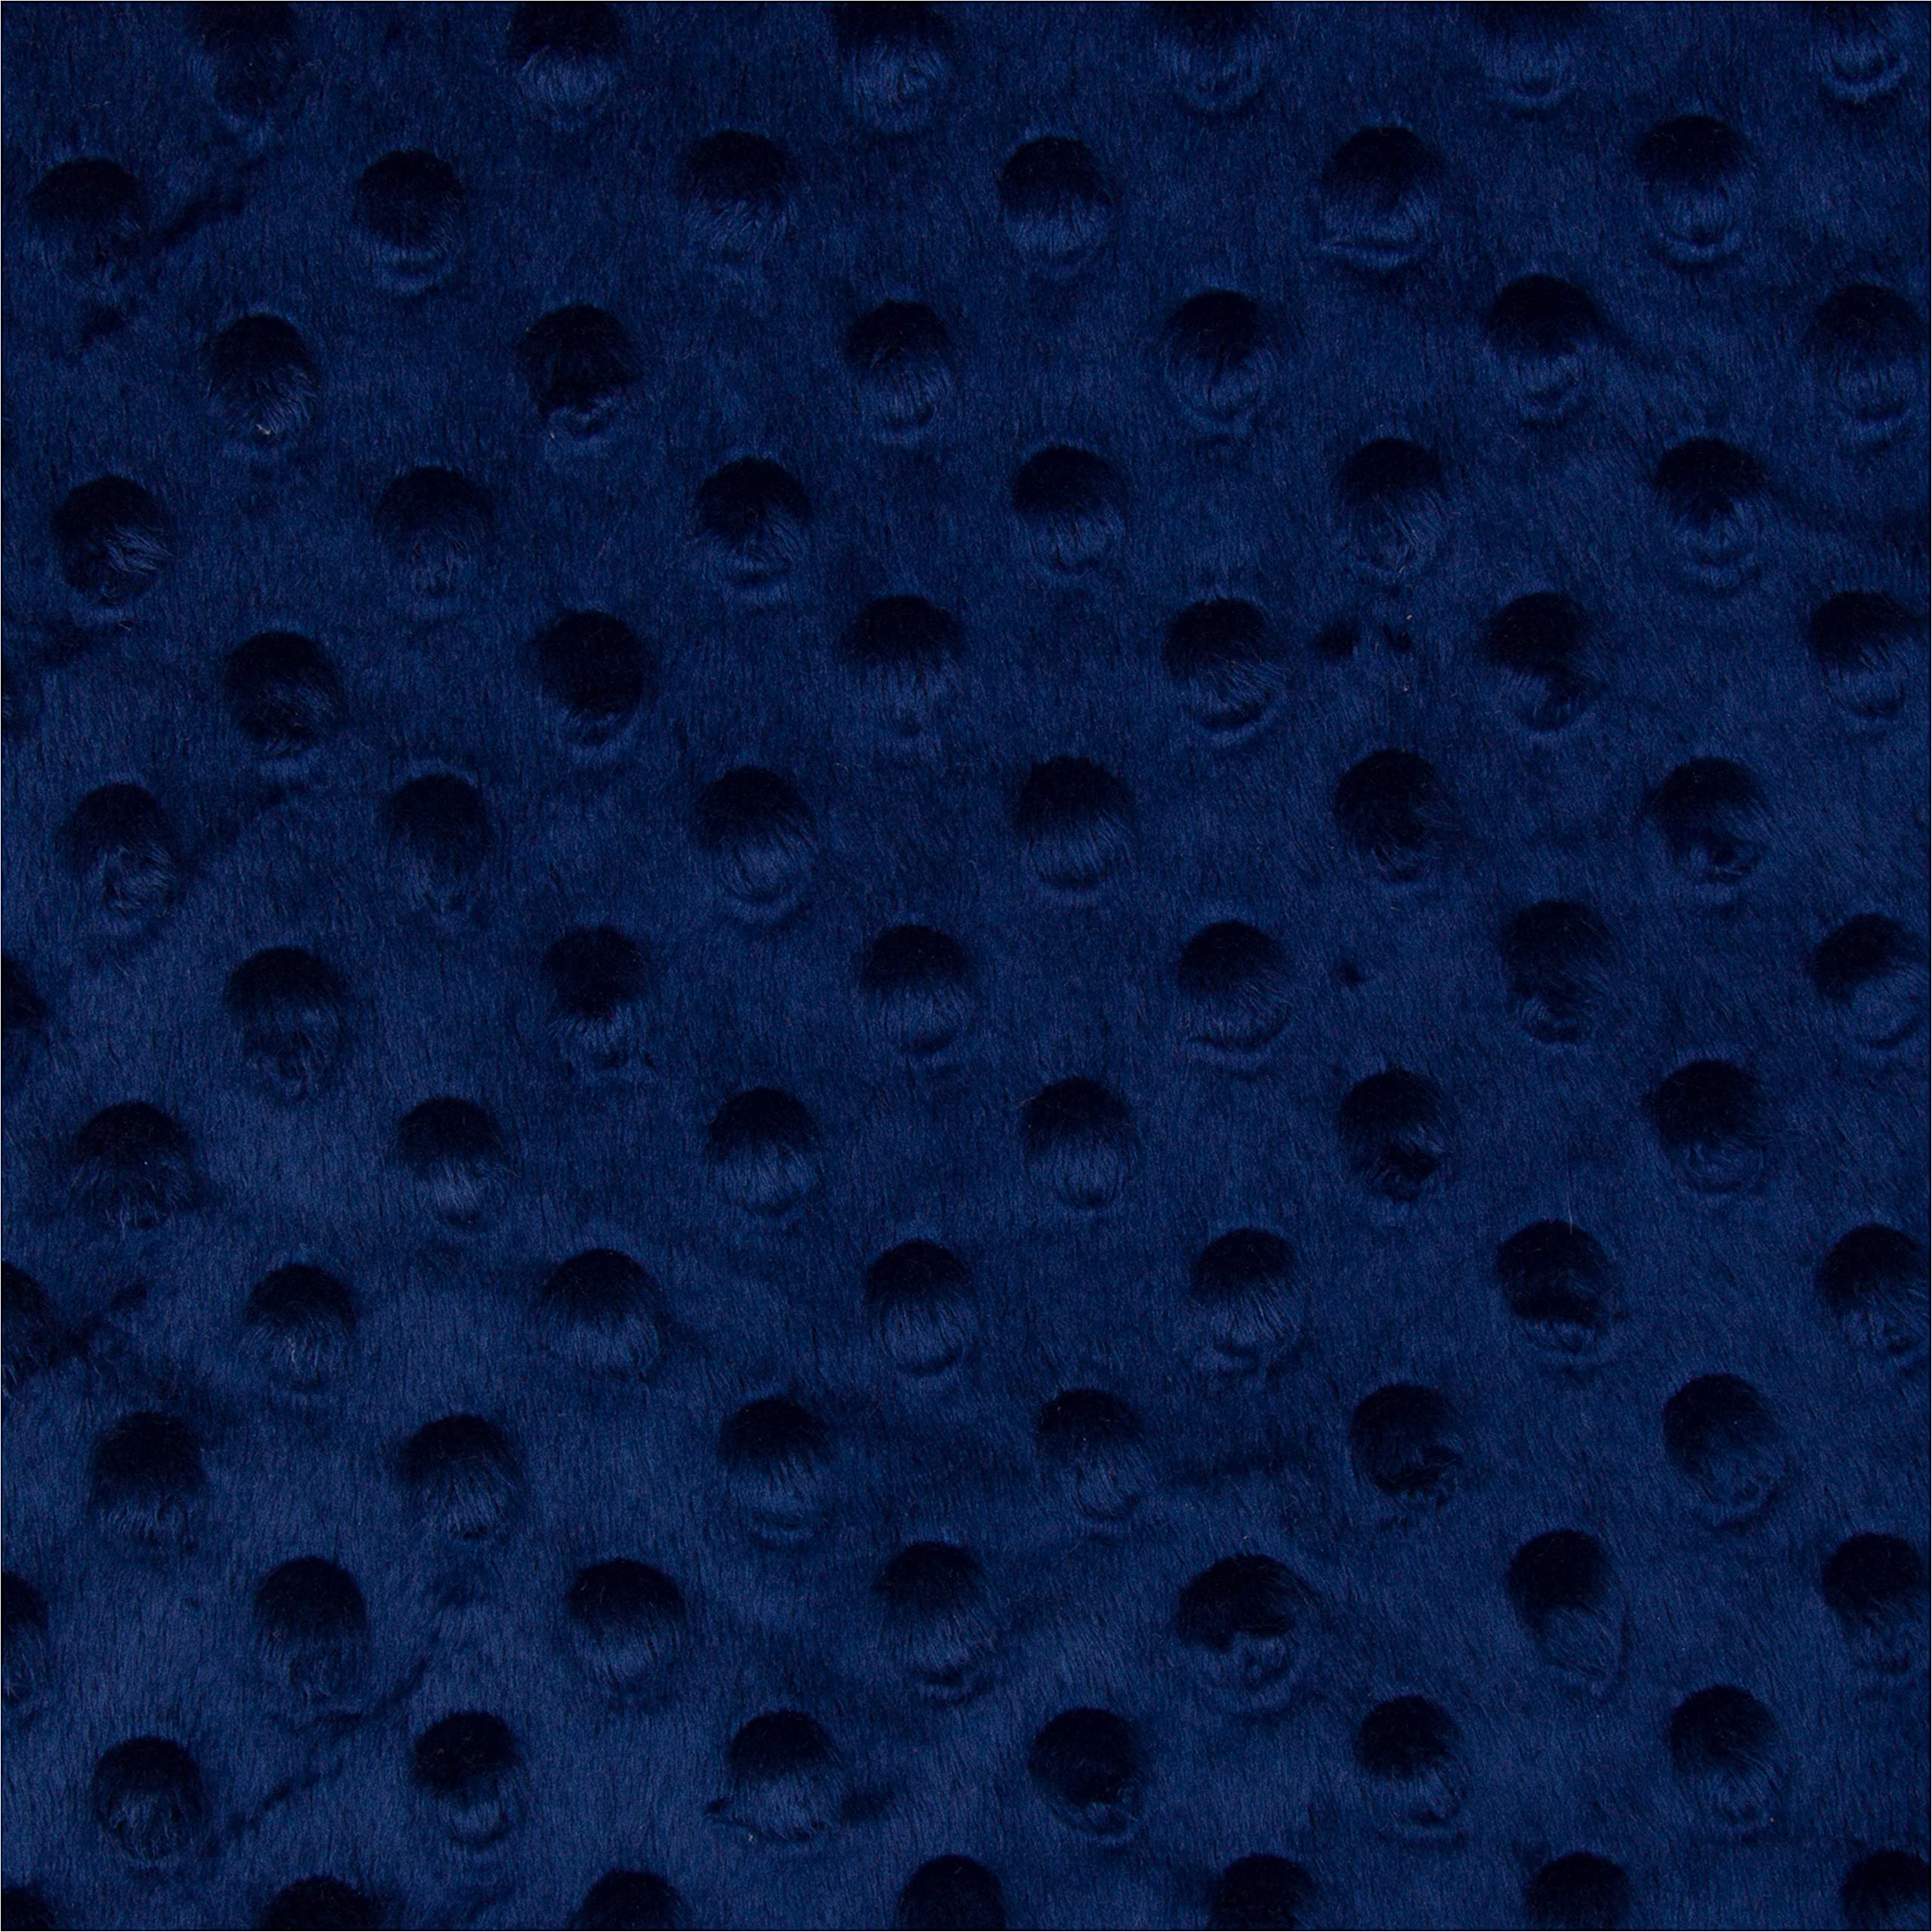 Gerber Baby Boys Girls Neutral Newborn Infant Baby Toddler Nursery Changing Pad Cover, Dotted Navy, 16